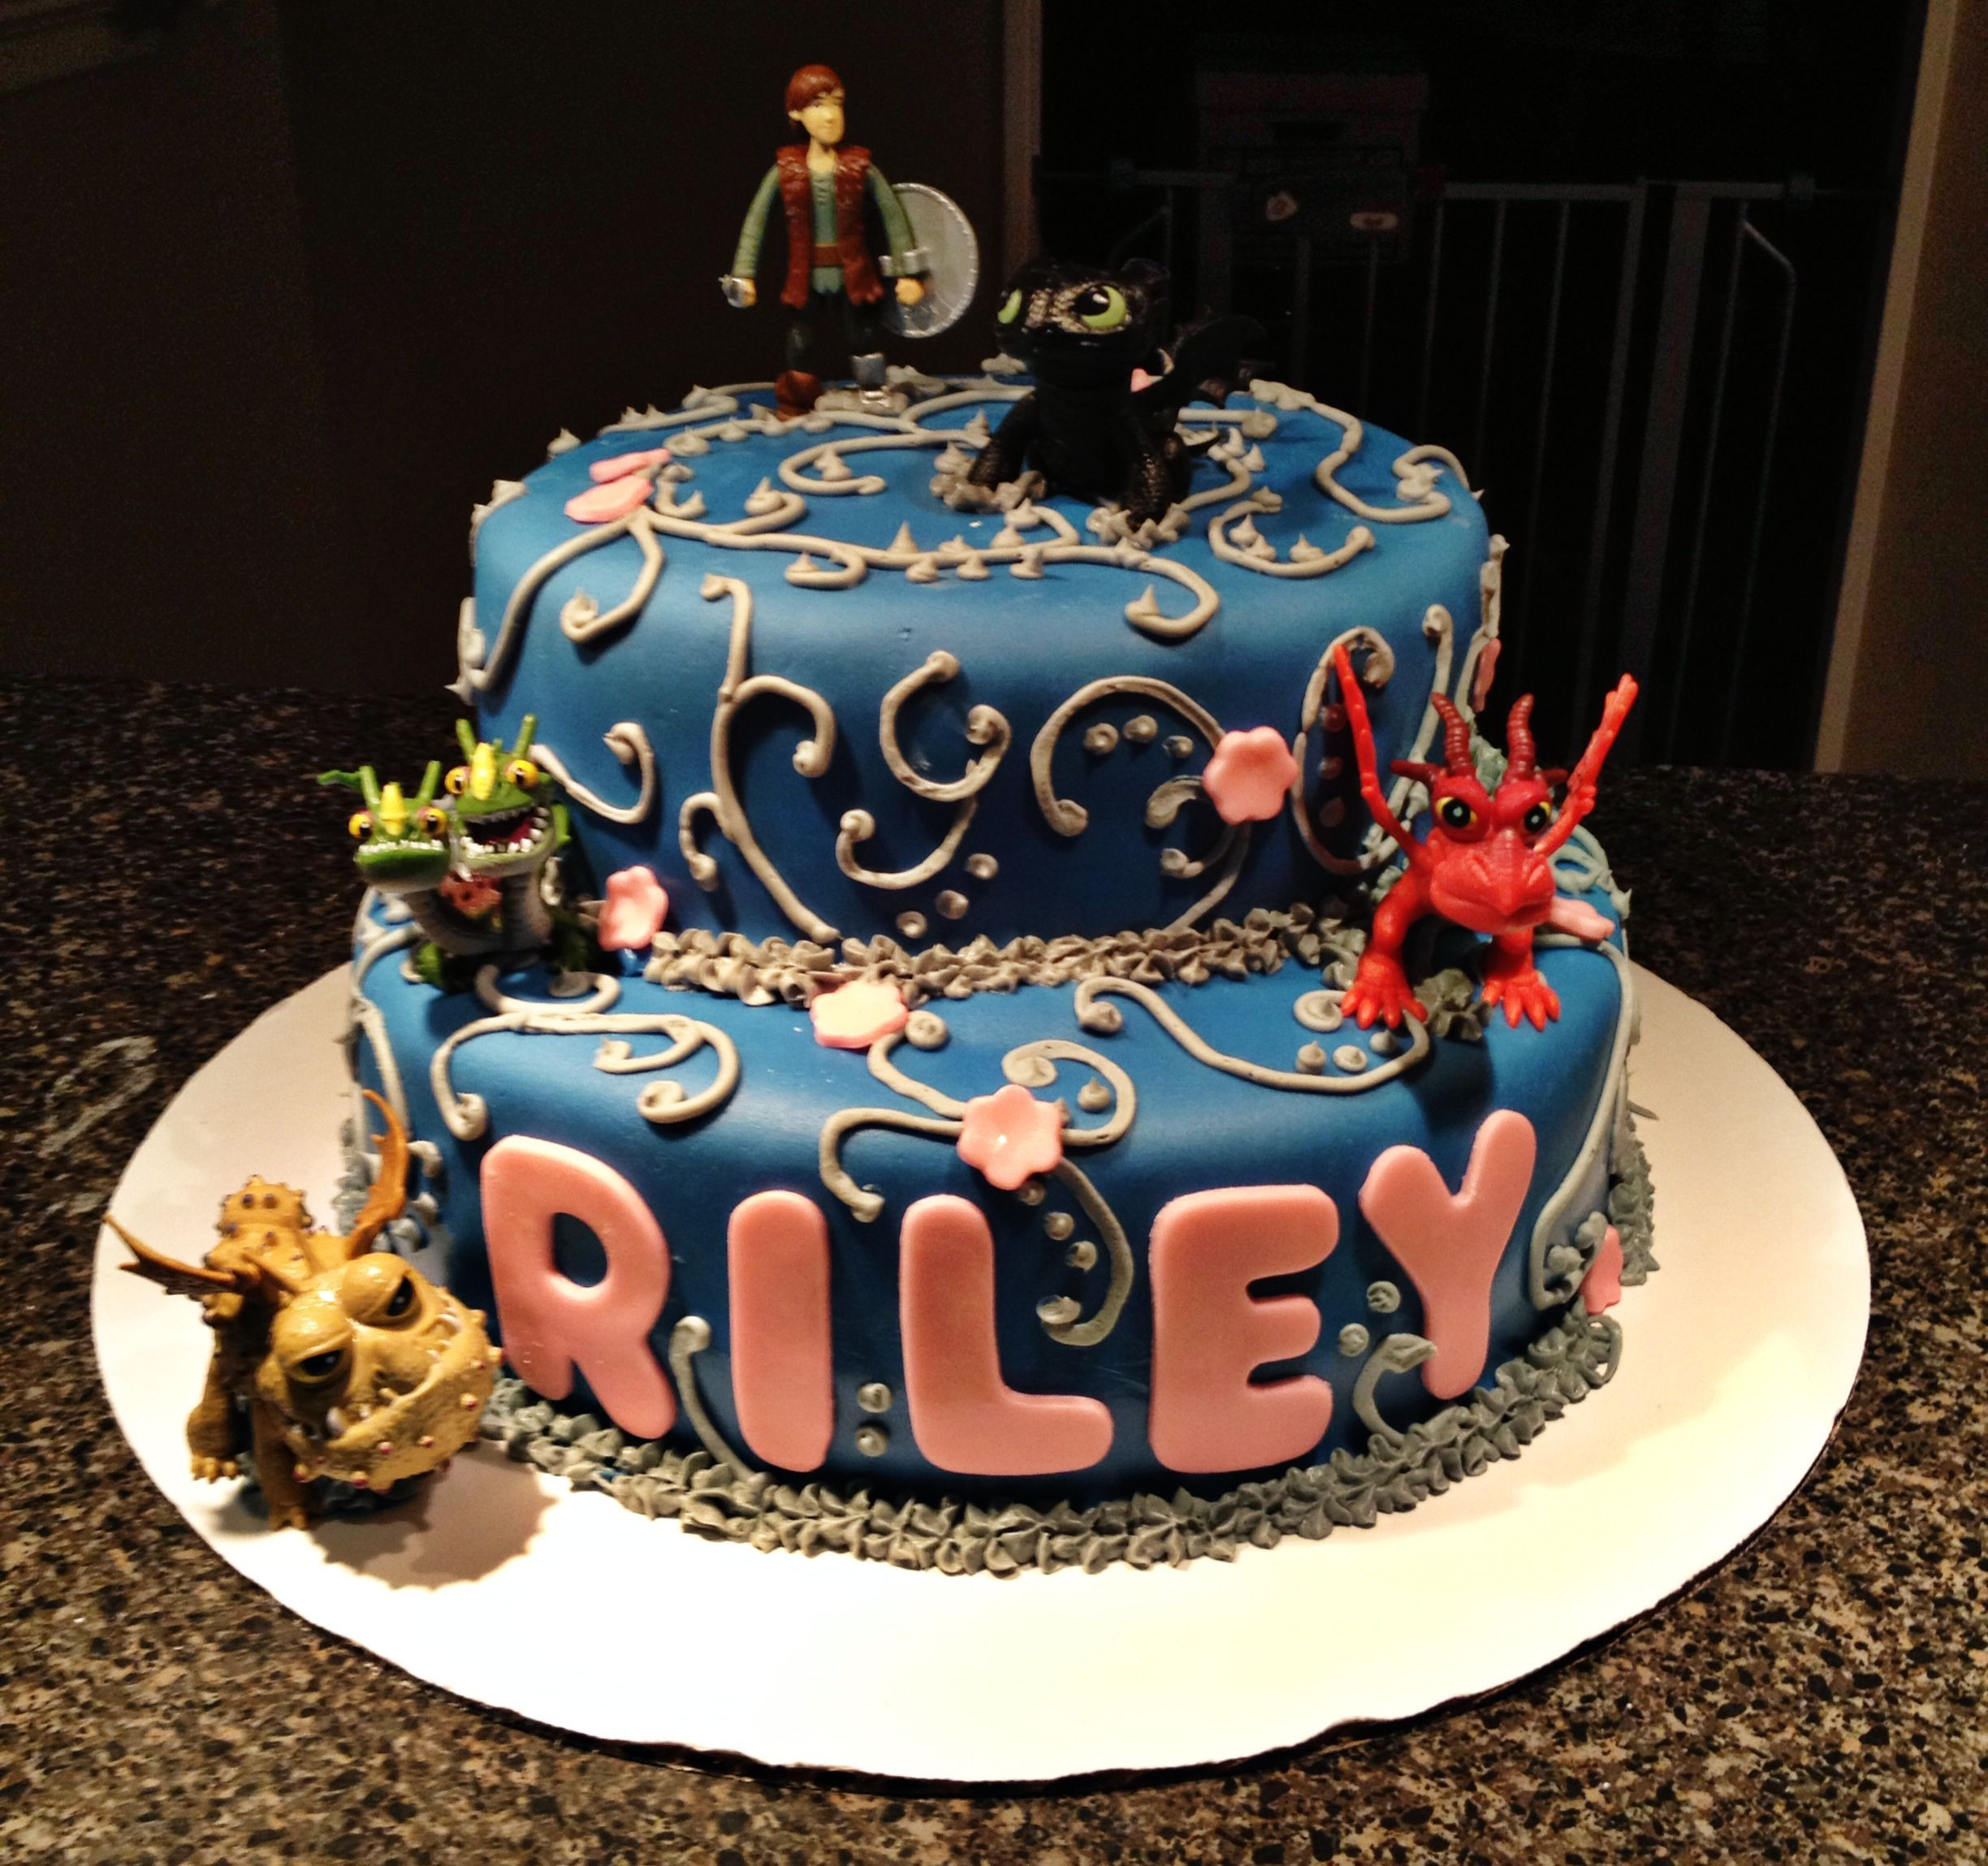 How To Train Your Dragon Birthday Cake
 How to Train Your Dragon Cake Ideas on Pinterest